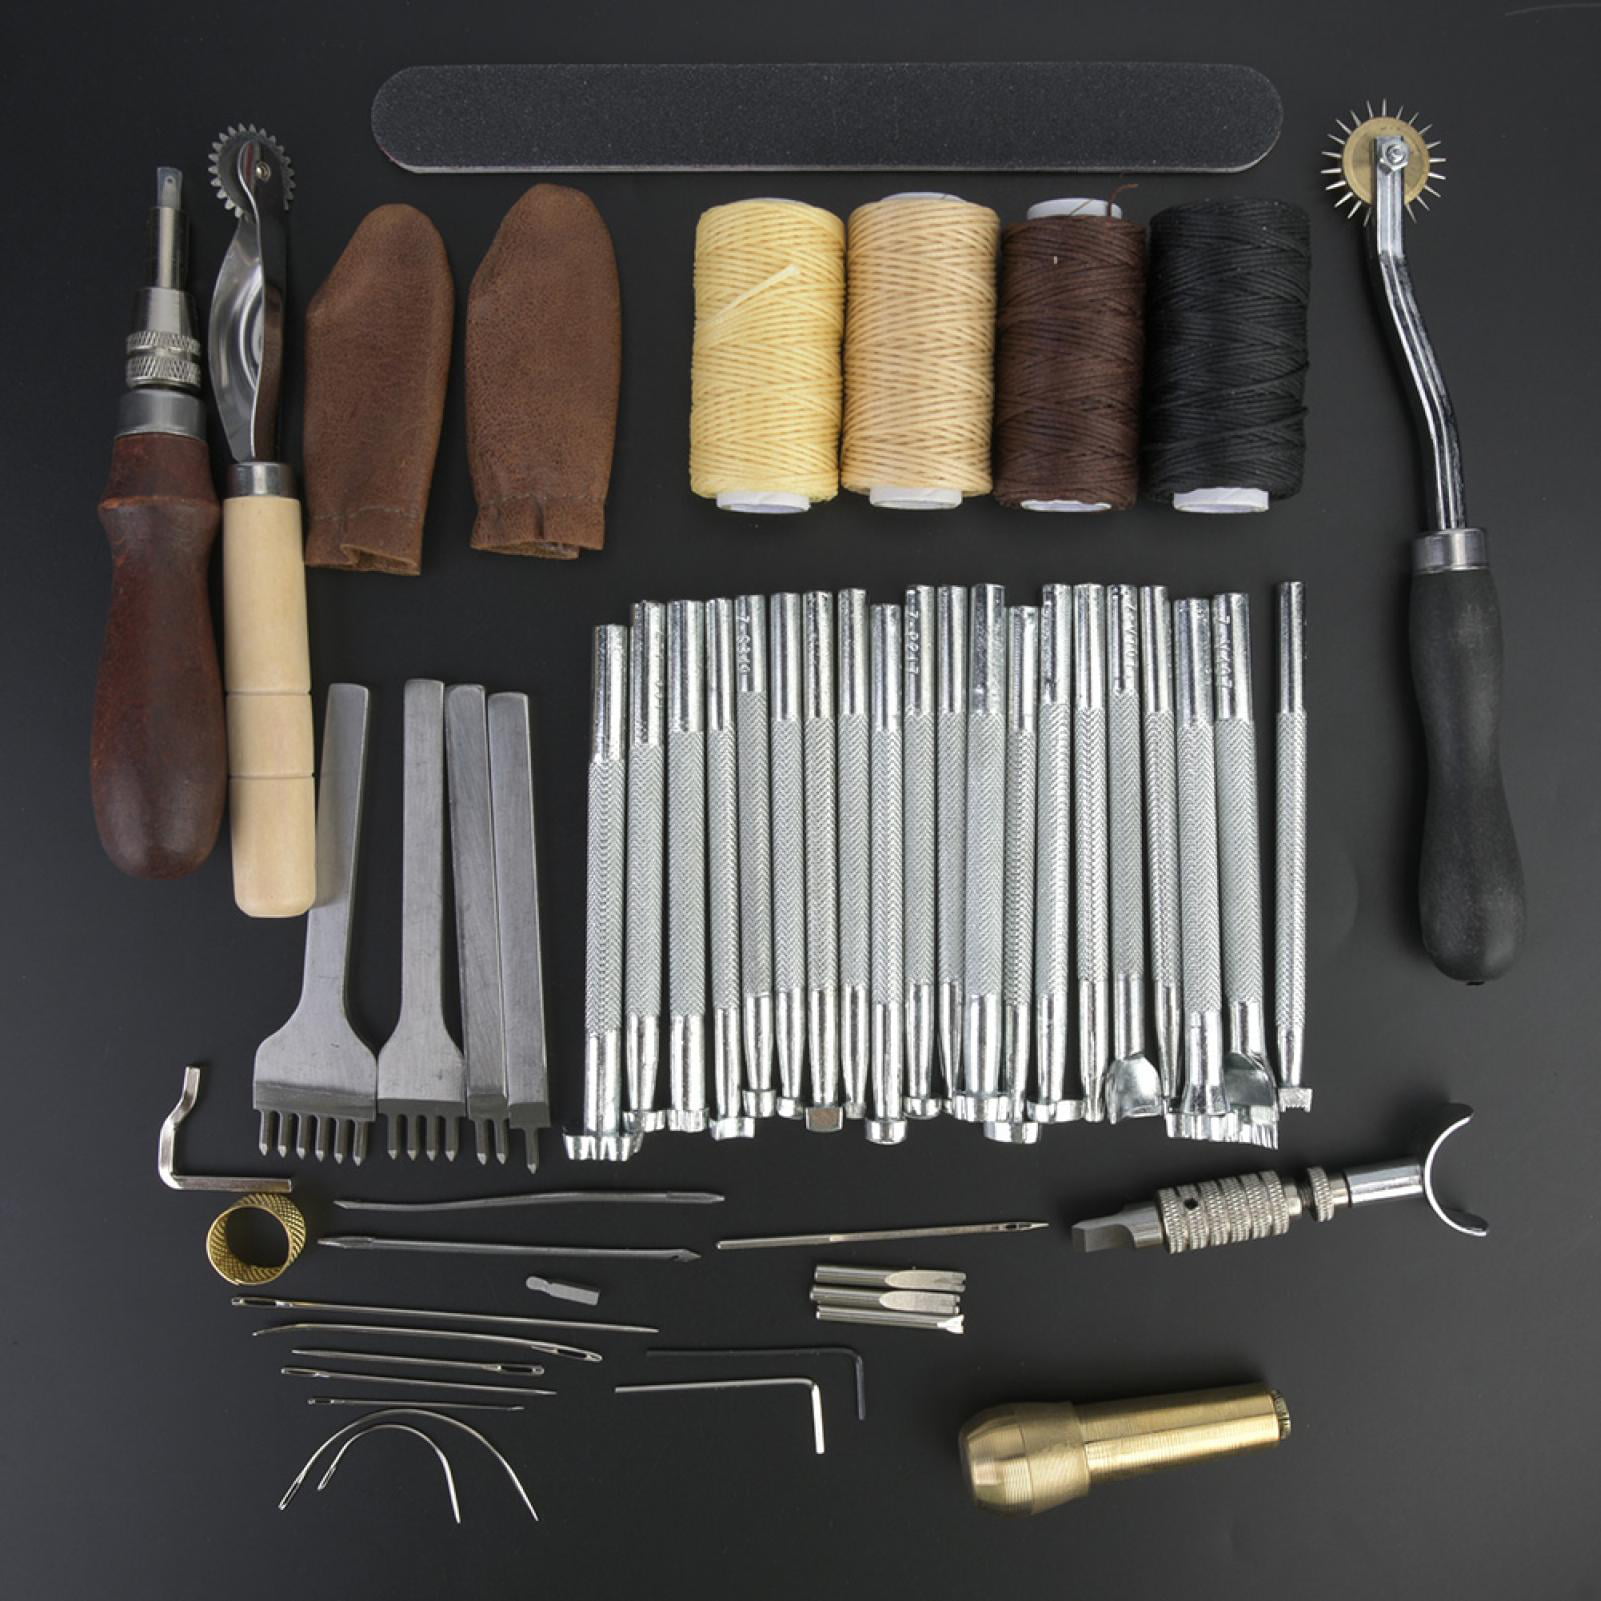 Beginner Class Tool Set ,making Bag, Leather Craft Tools MLT P0000BYV 